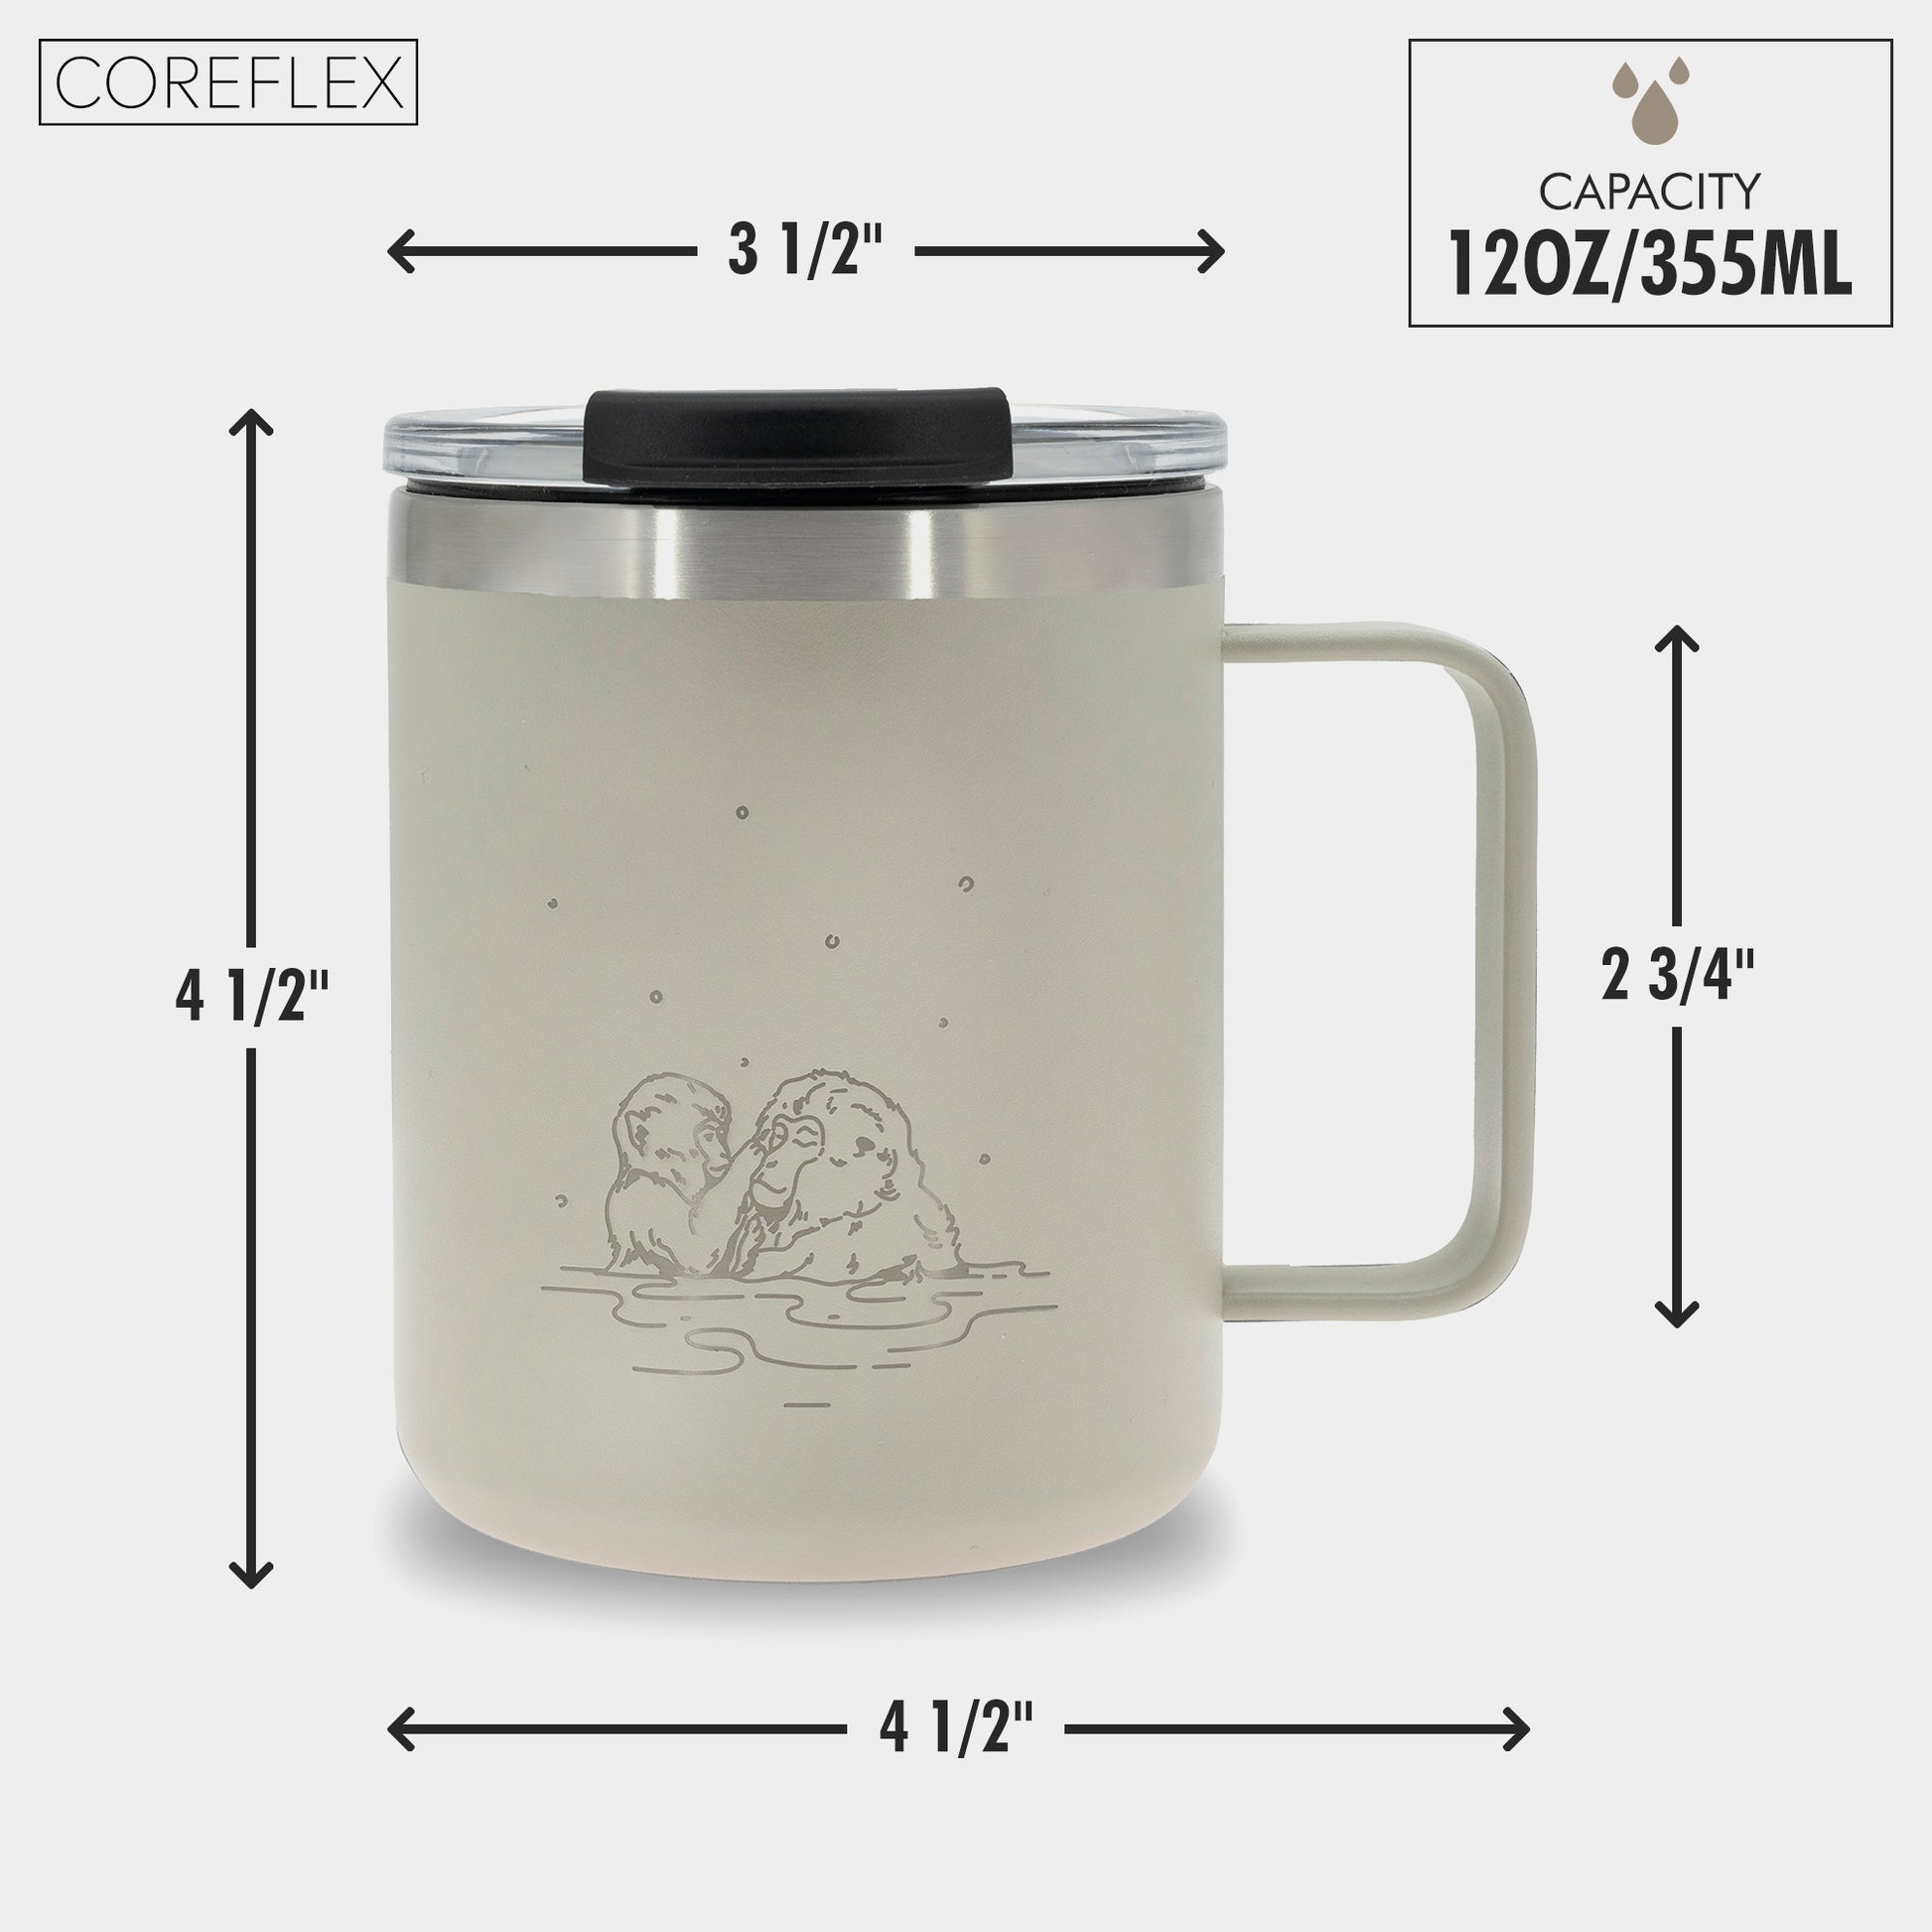 12 oz Double Wall 18/8 Stainless Steel Thermal Mug — Resuscitation Academy